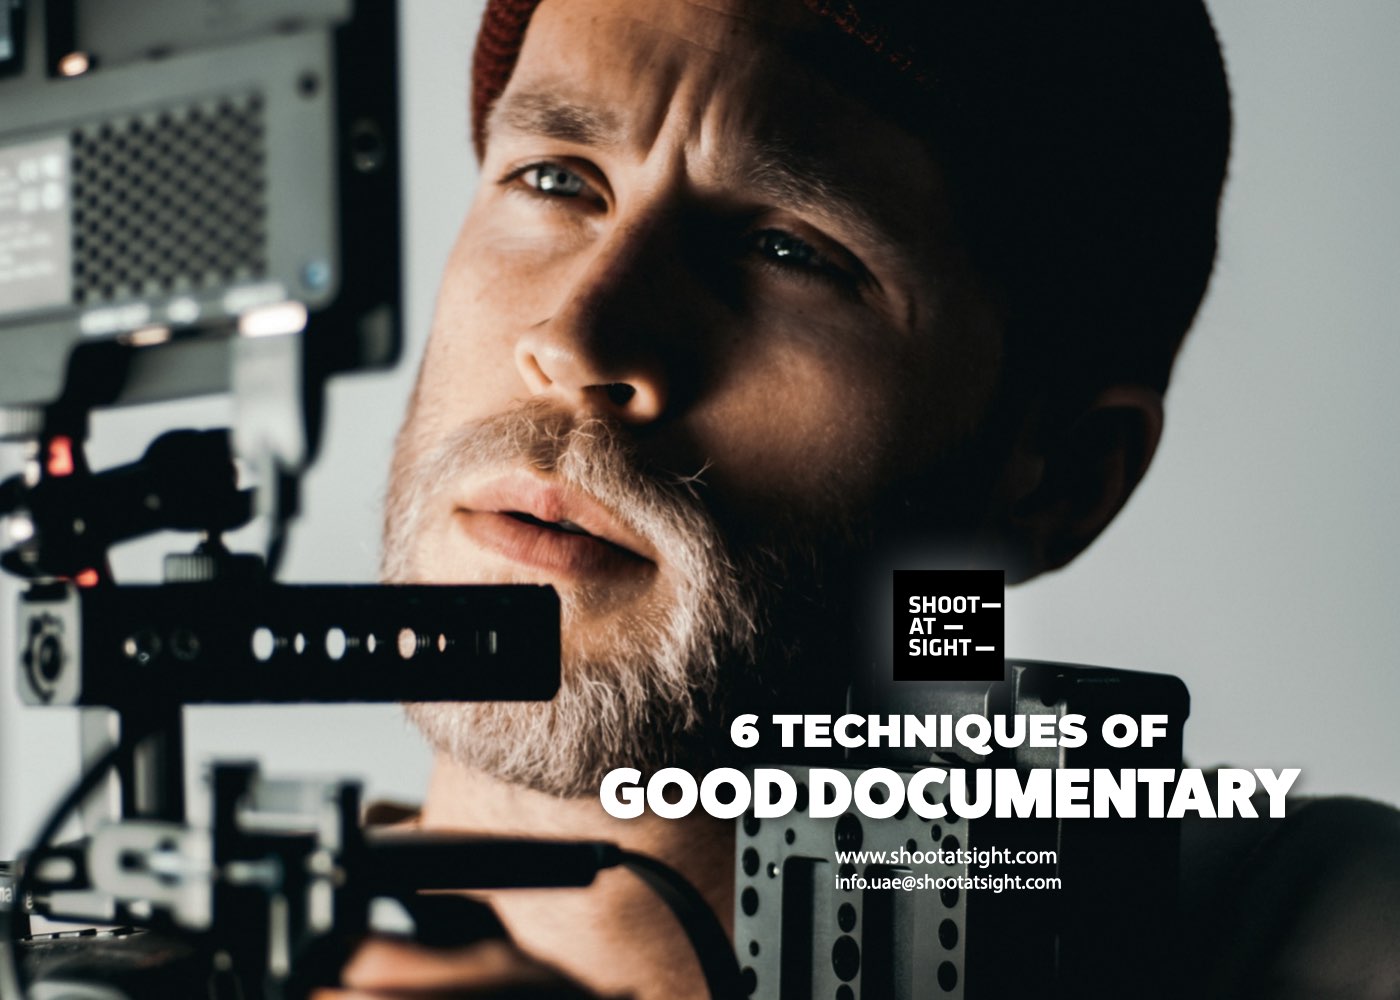 What Are The 6 Techniques of A Good Documentary?